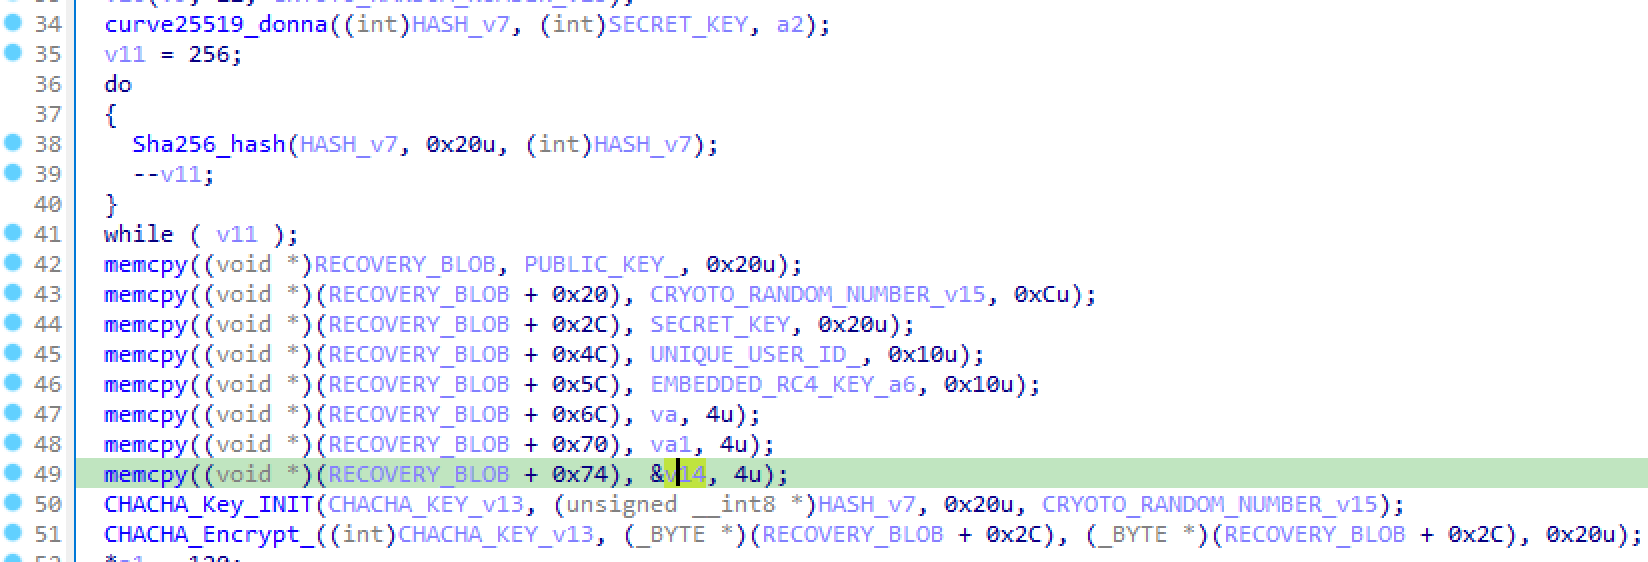 The RECOVERY BLOB is encrypted with ChaCha20 as shown and stored in HKCUSoftware<32-byte ID >RECOVERY